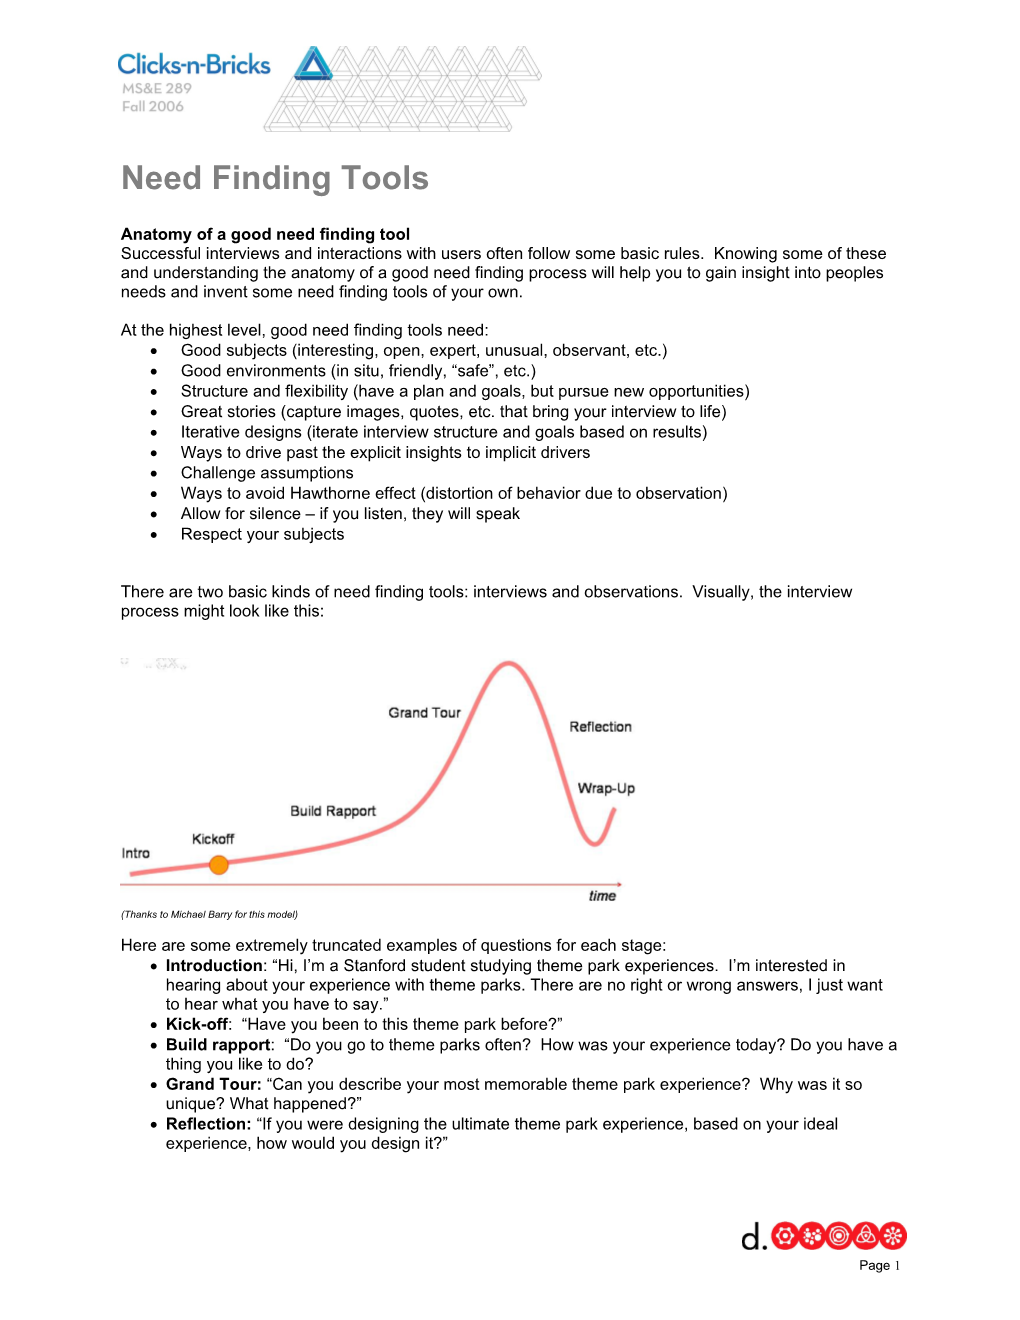 Anatomy of a Good Need Finding Tool